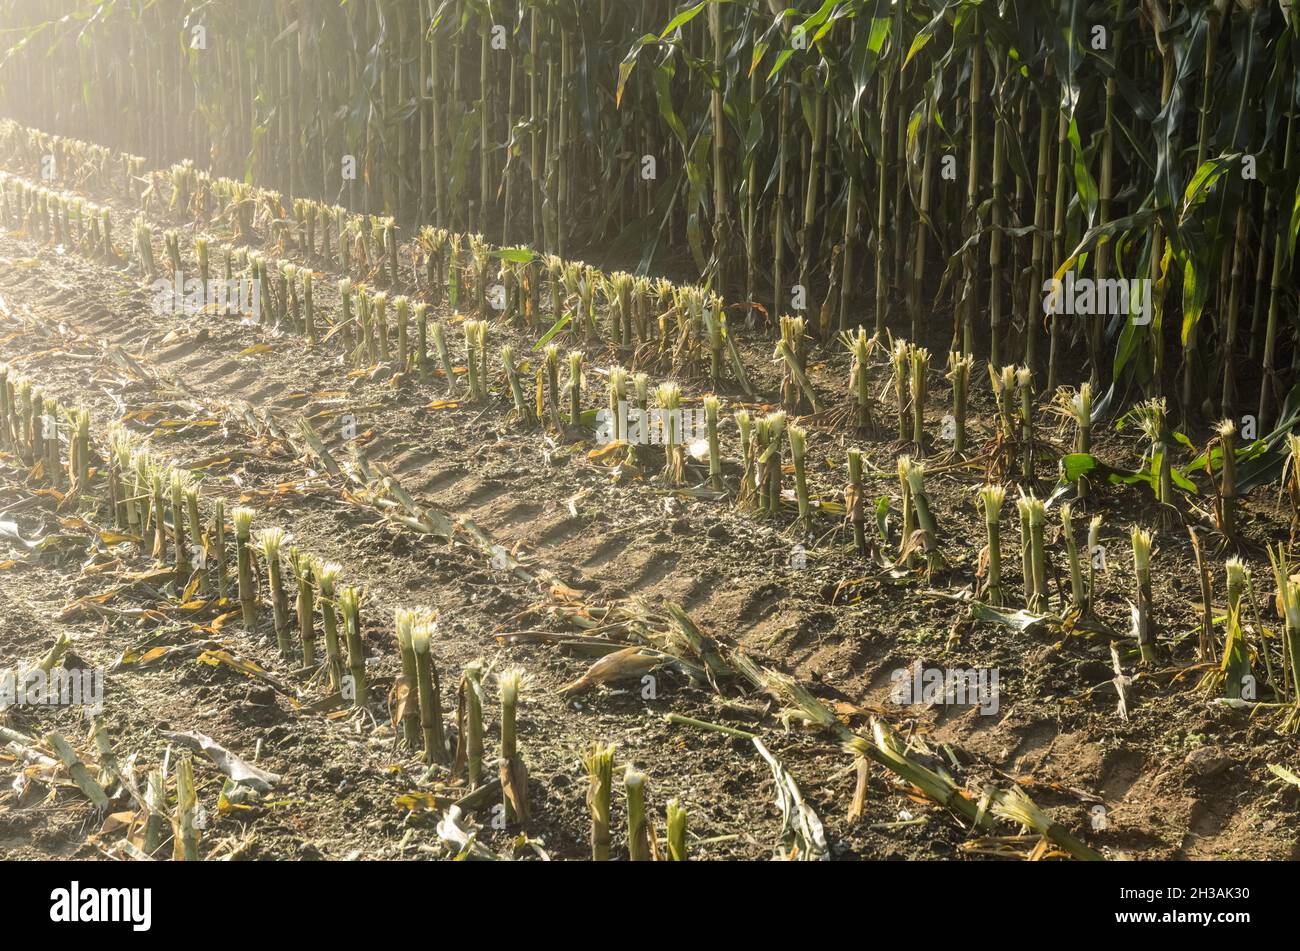 Cut And Partly Harvested Stalks Of Corn Maize Plants Zea Mays In An